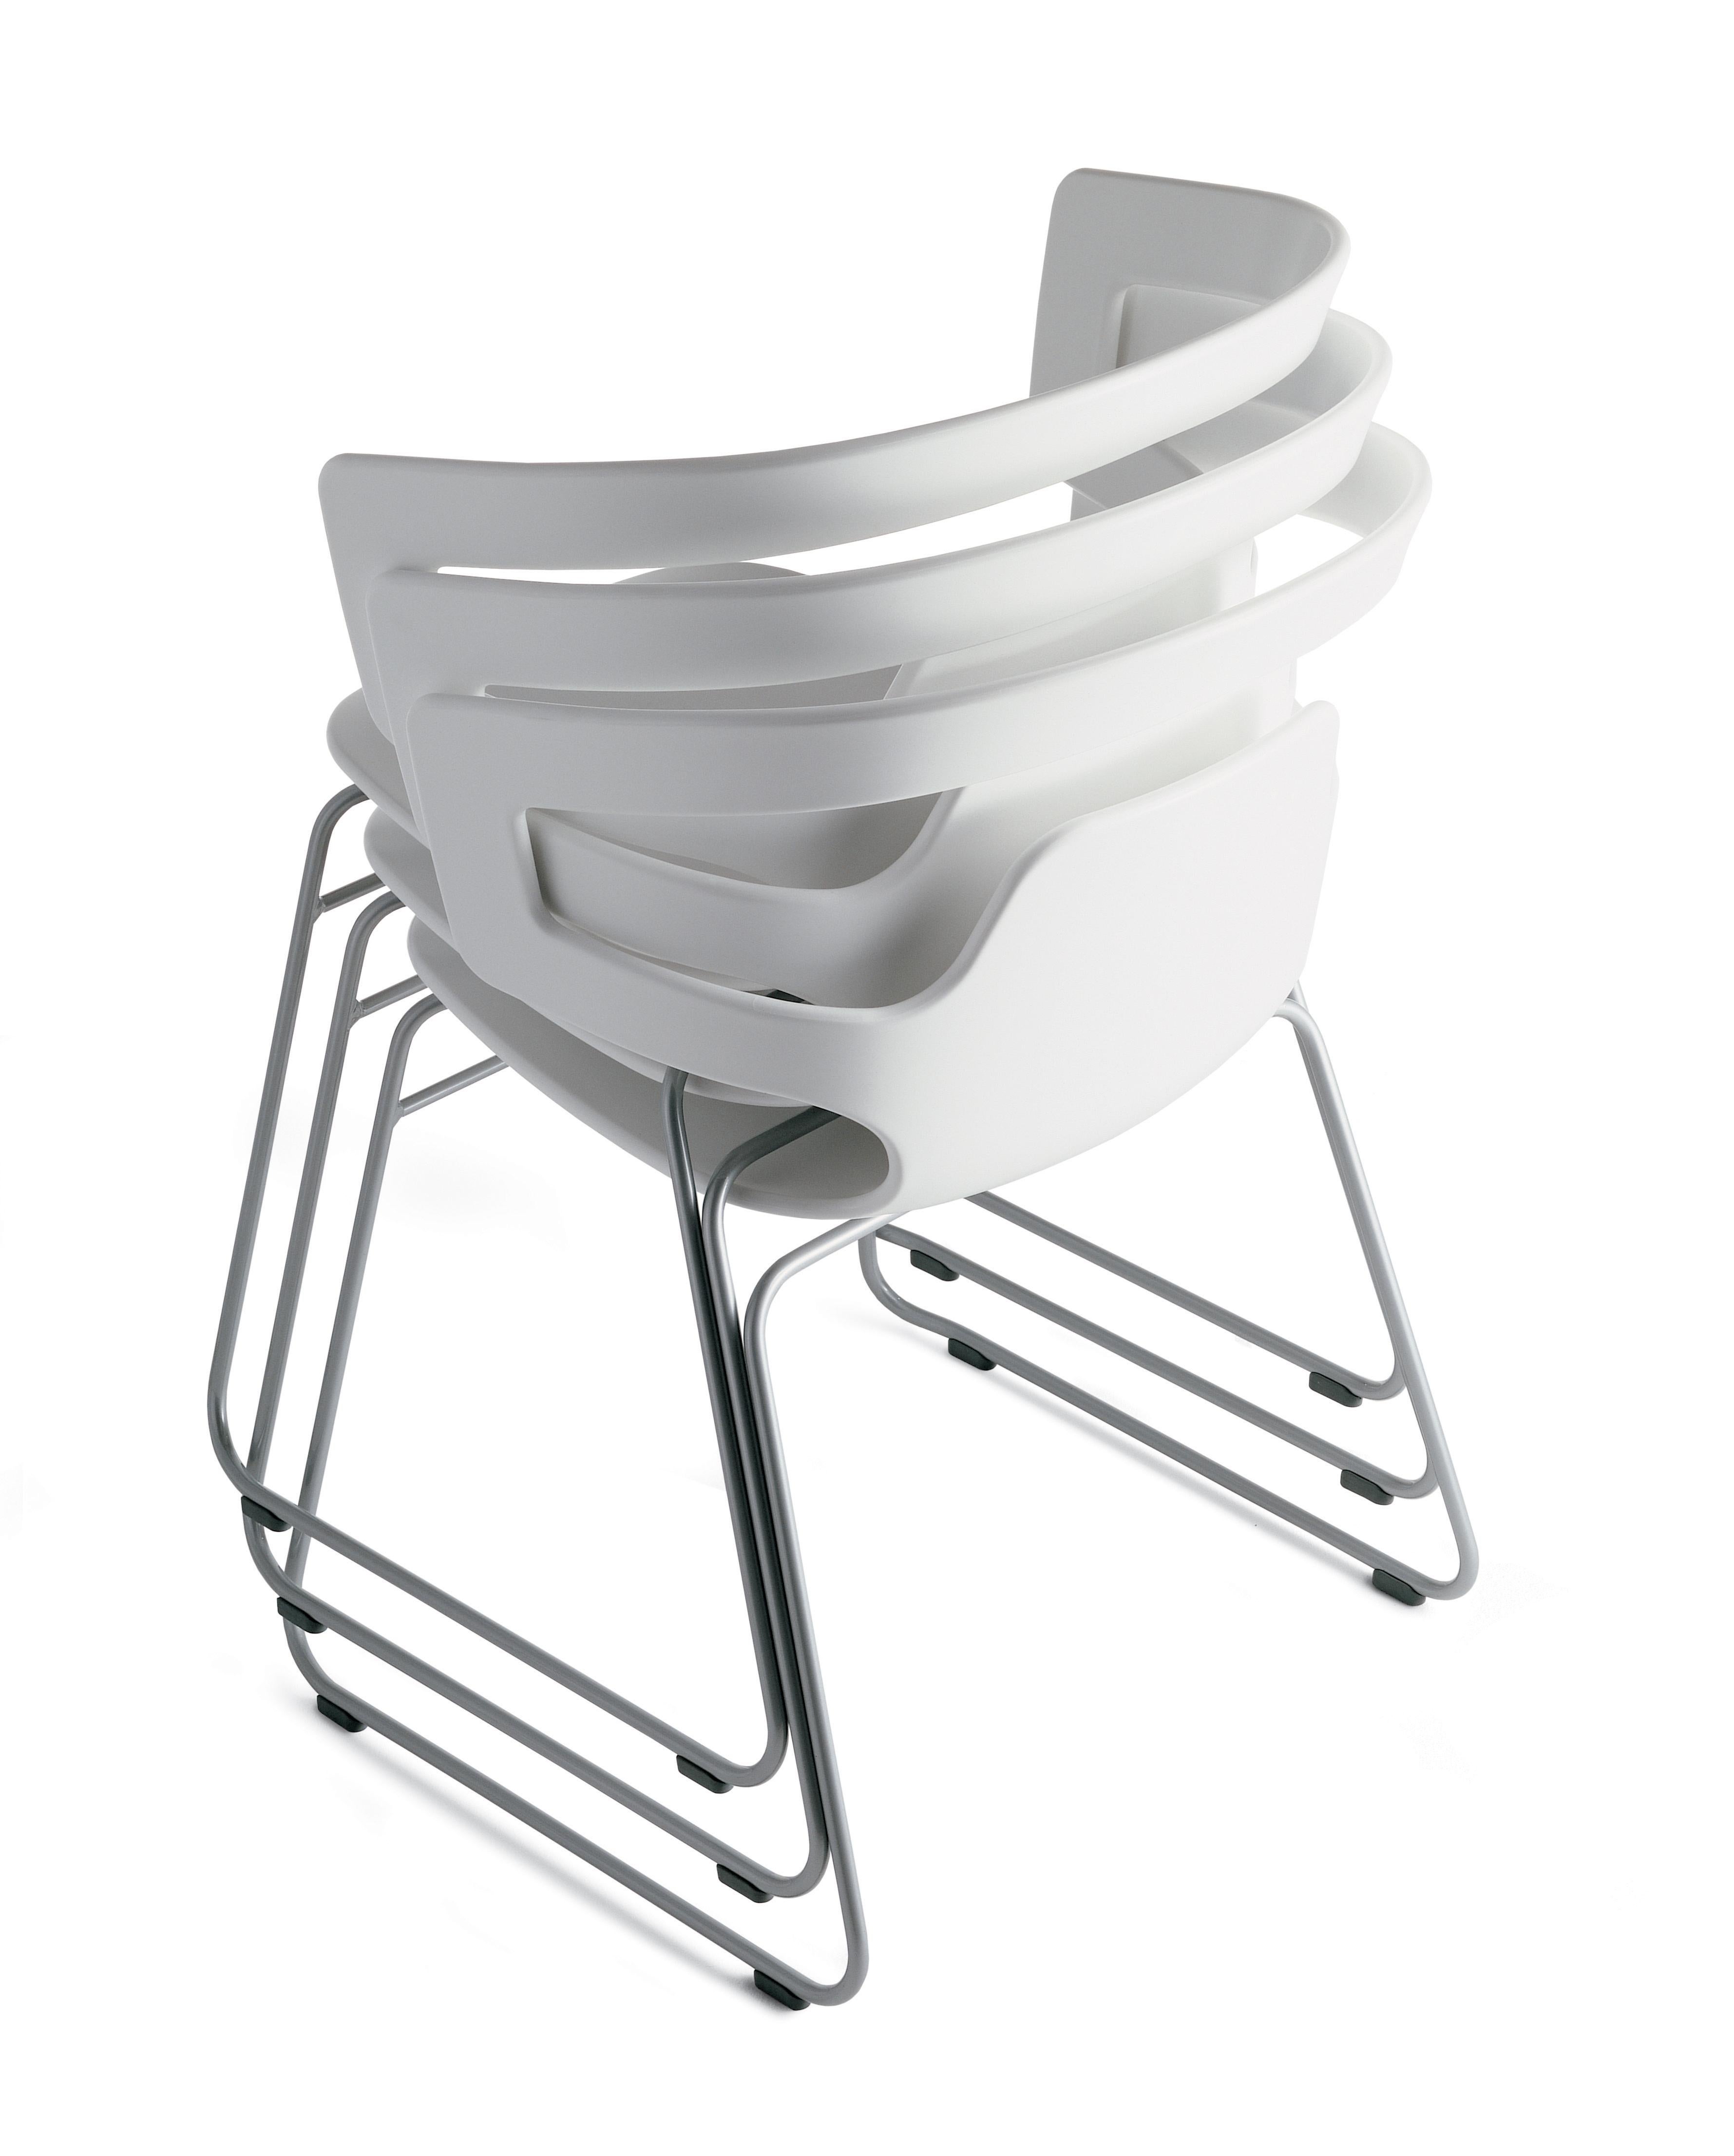 Alias 501 Segesta Sledge Chair in White & Chromed Steel Frame by Alfredo Häberli In New Condition For Sale In Brooklyn, NY